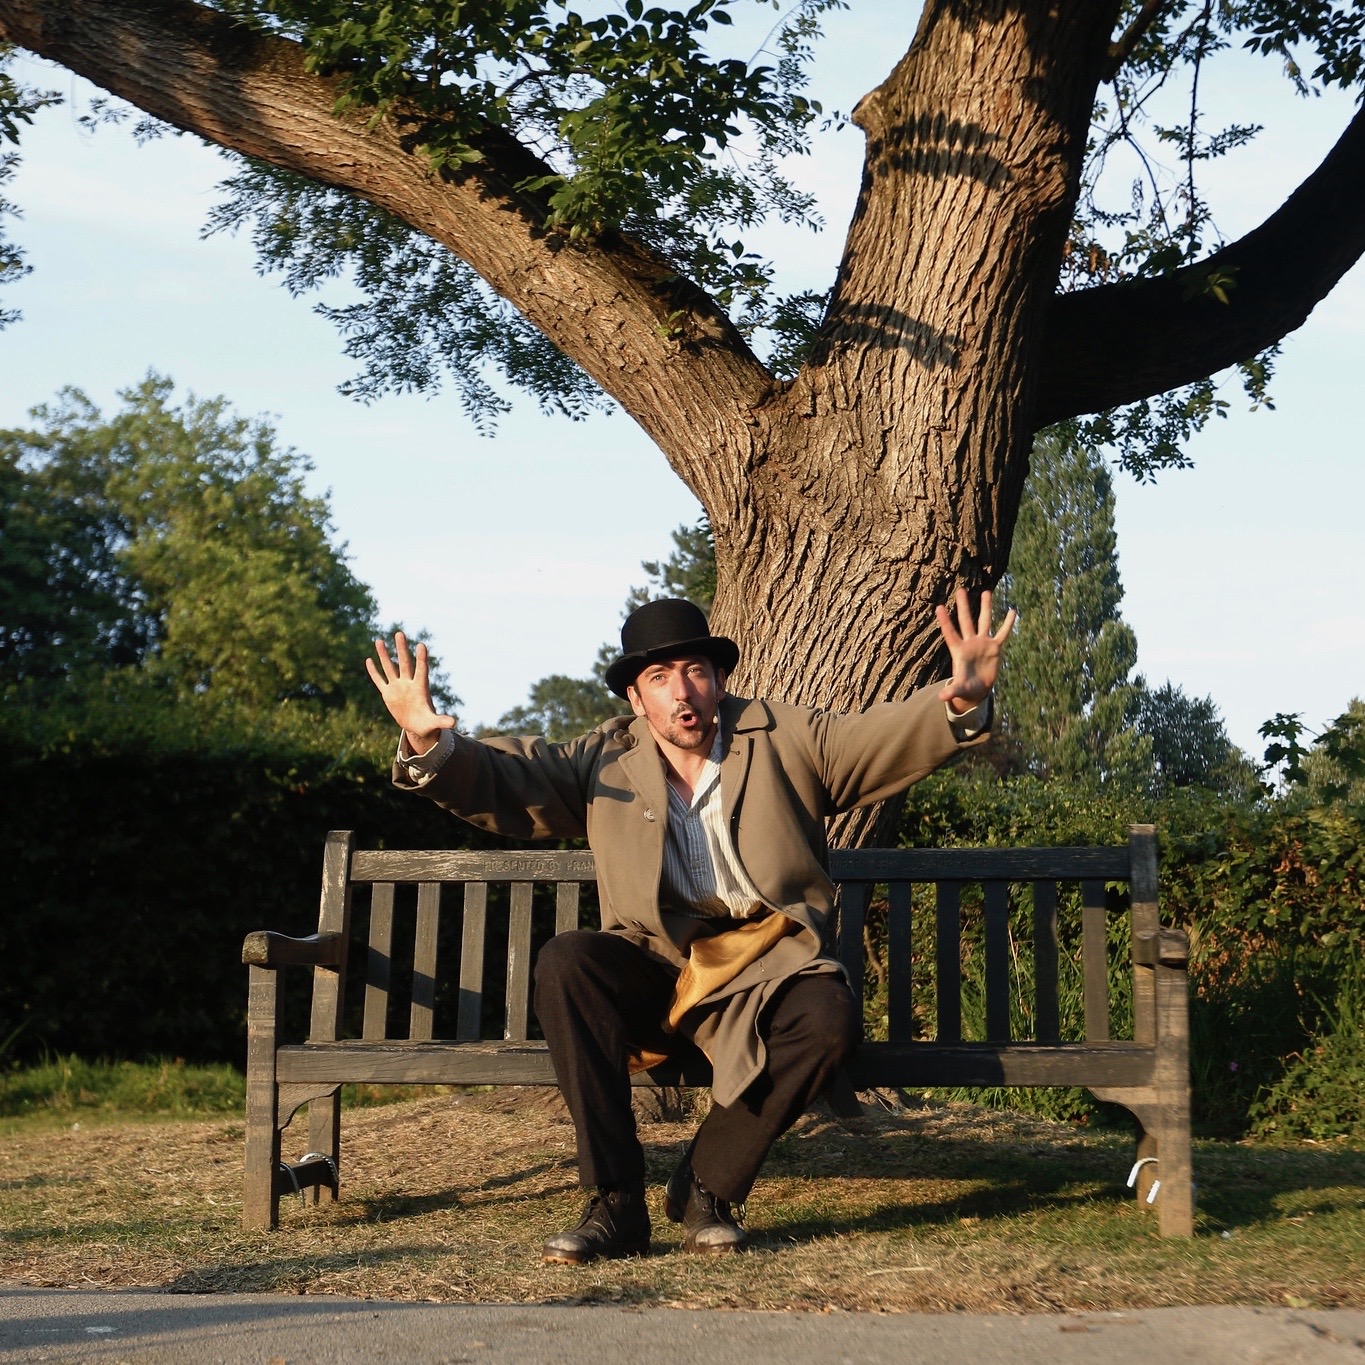 actor chris hannon in tan overcoat and black hat, sat on park bench in front of tree, gesturing with arms wide out and fingers splayed. image credits: Northedge Photography